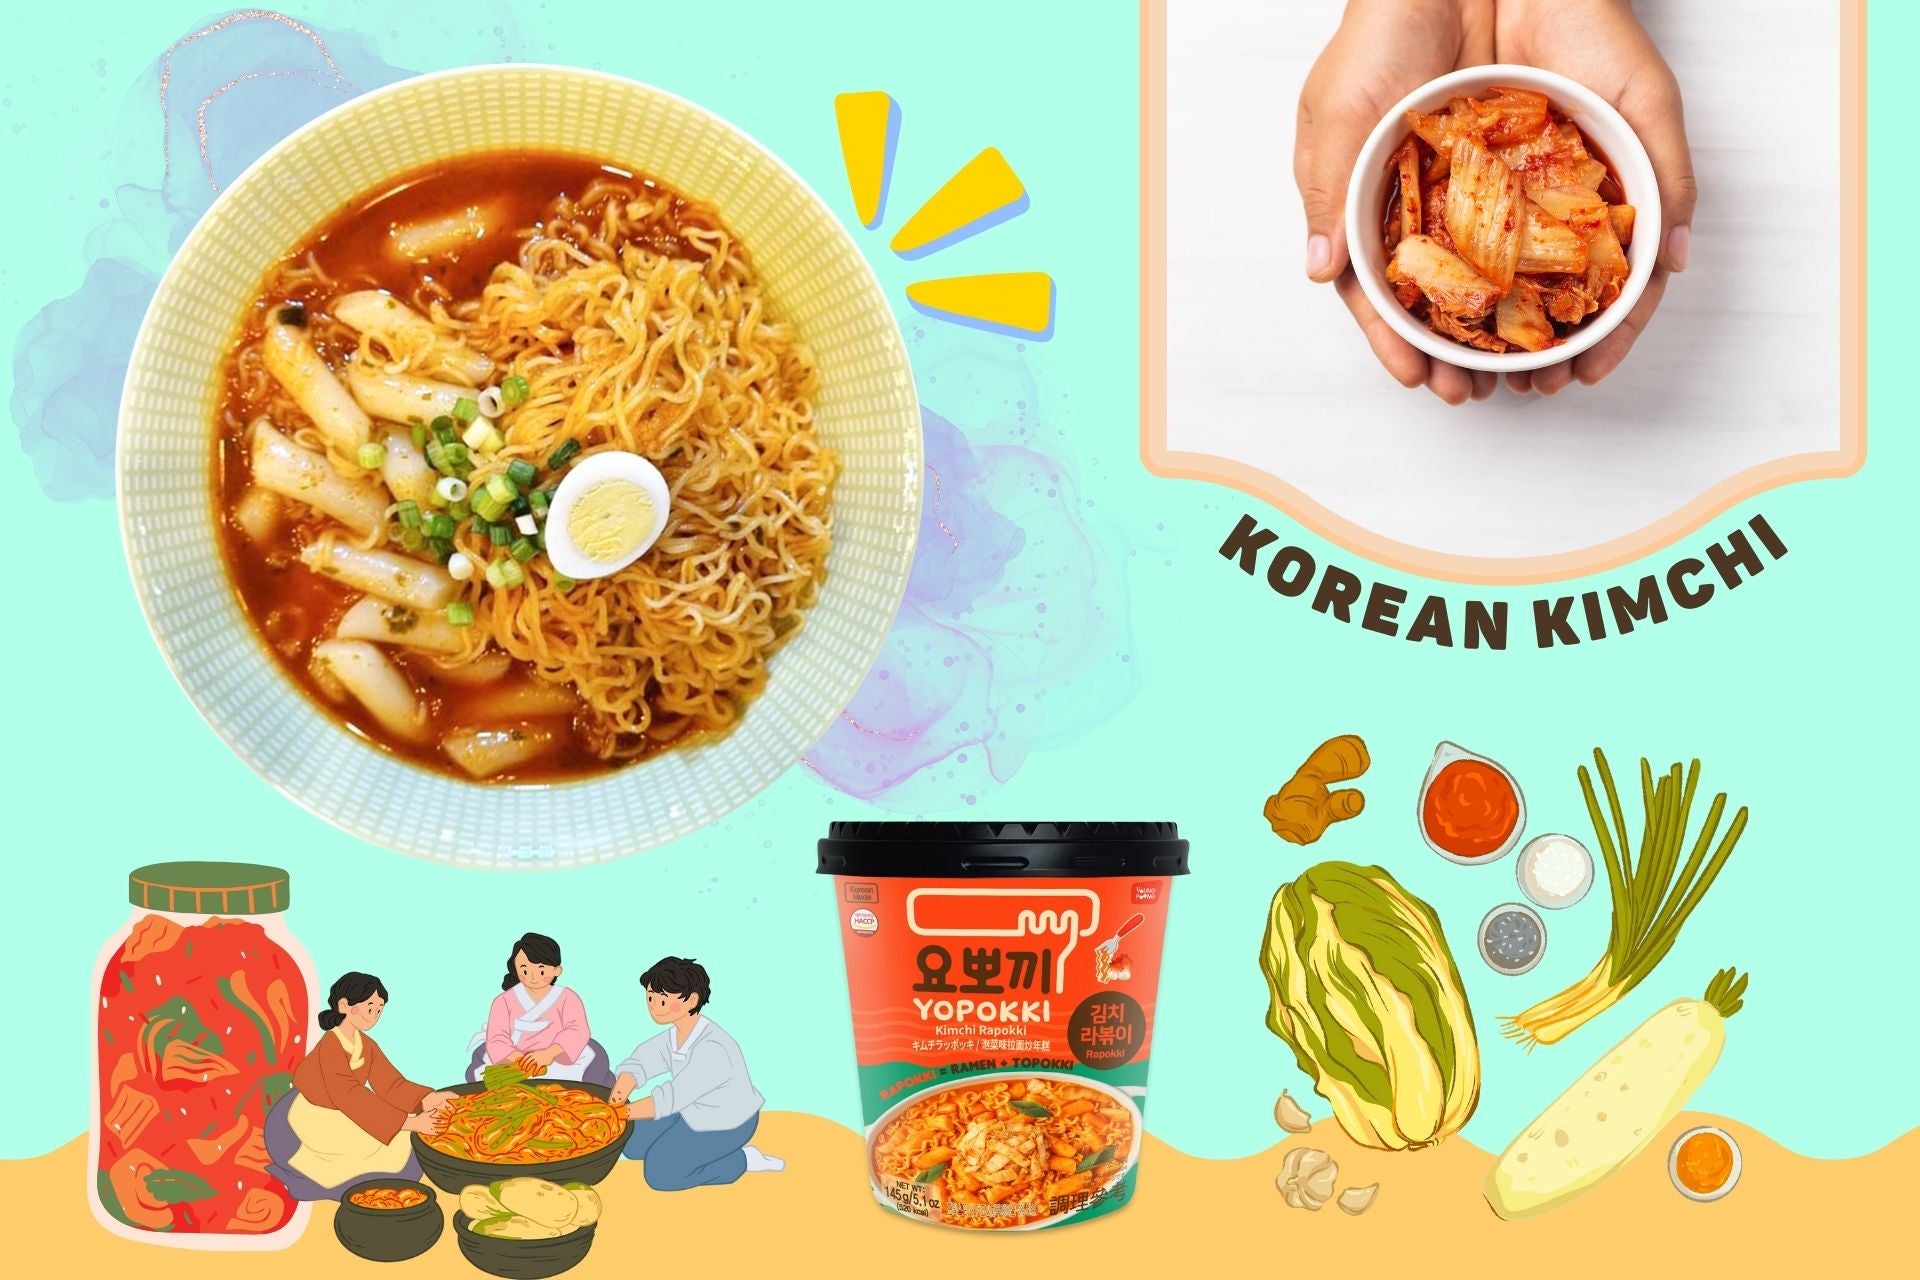 yopokki-Experience-the-true-taste-of-Korea-conveniently-with-the-Kimchi-Rabokki-Cup